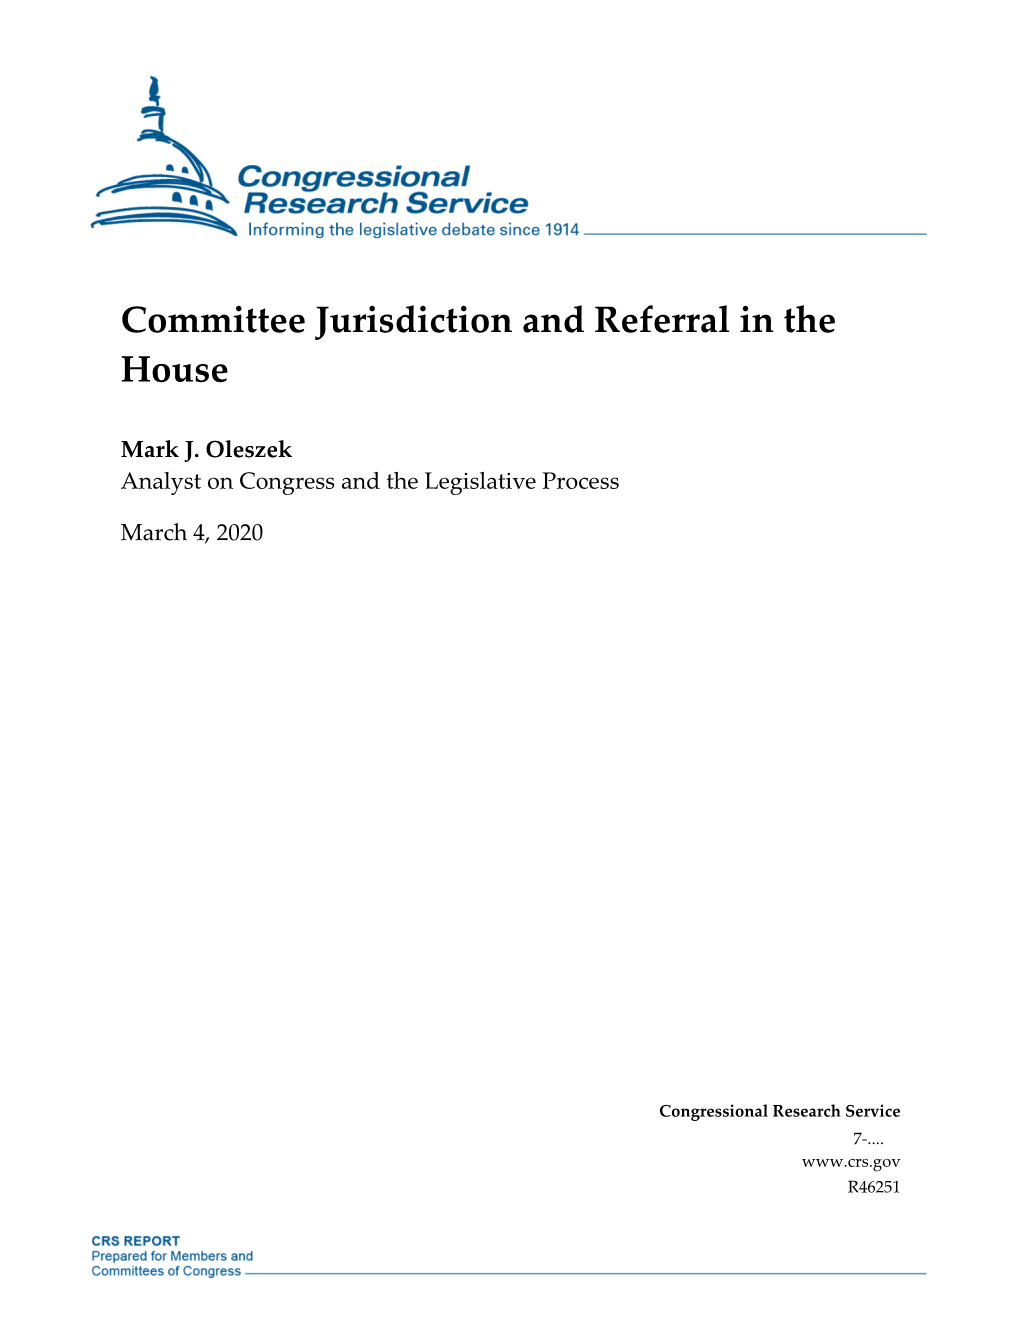 Committee Jurisdiction and Referral in the House